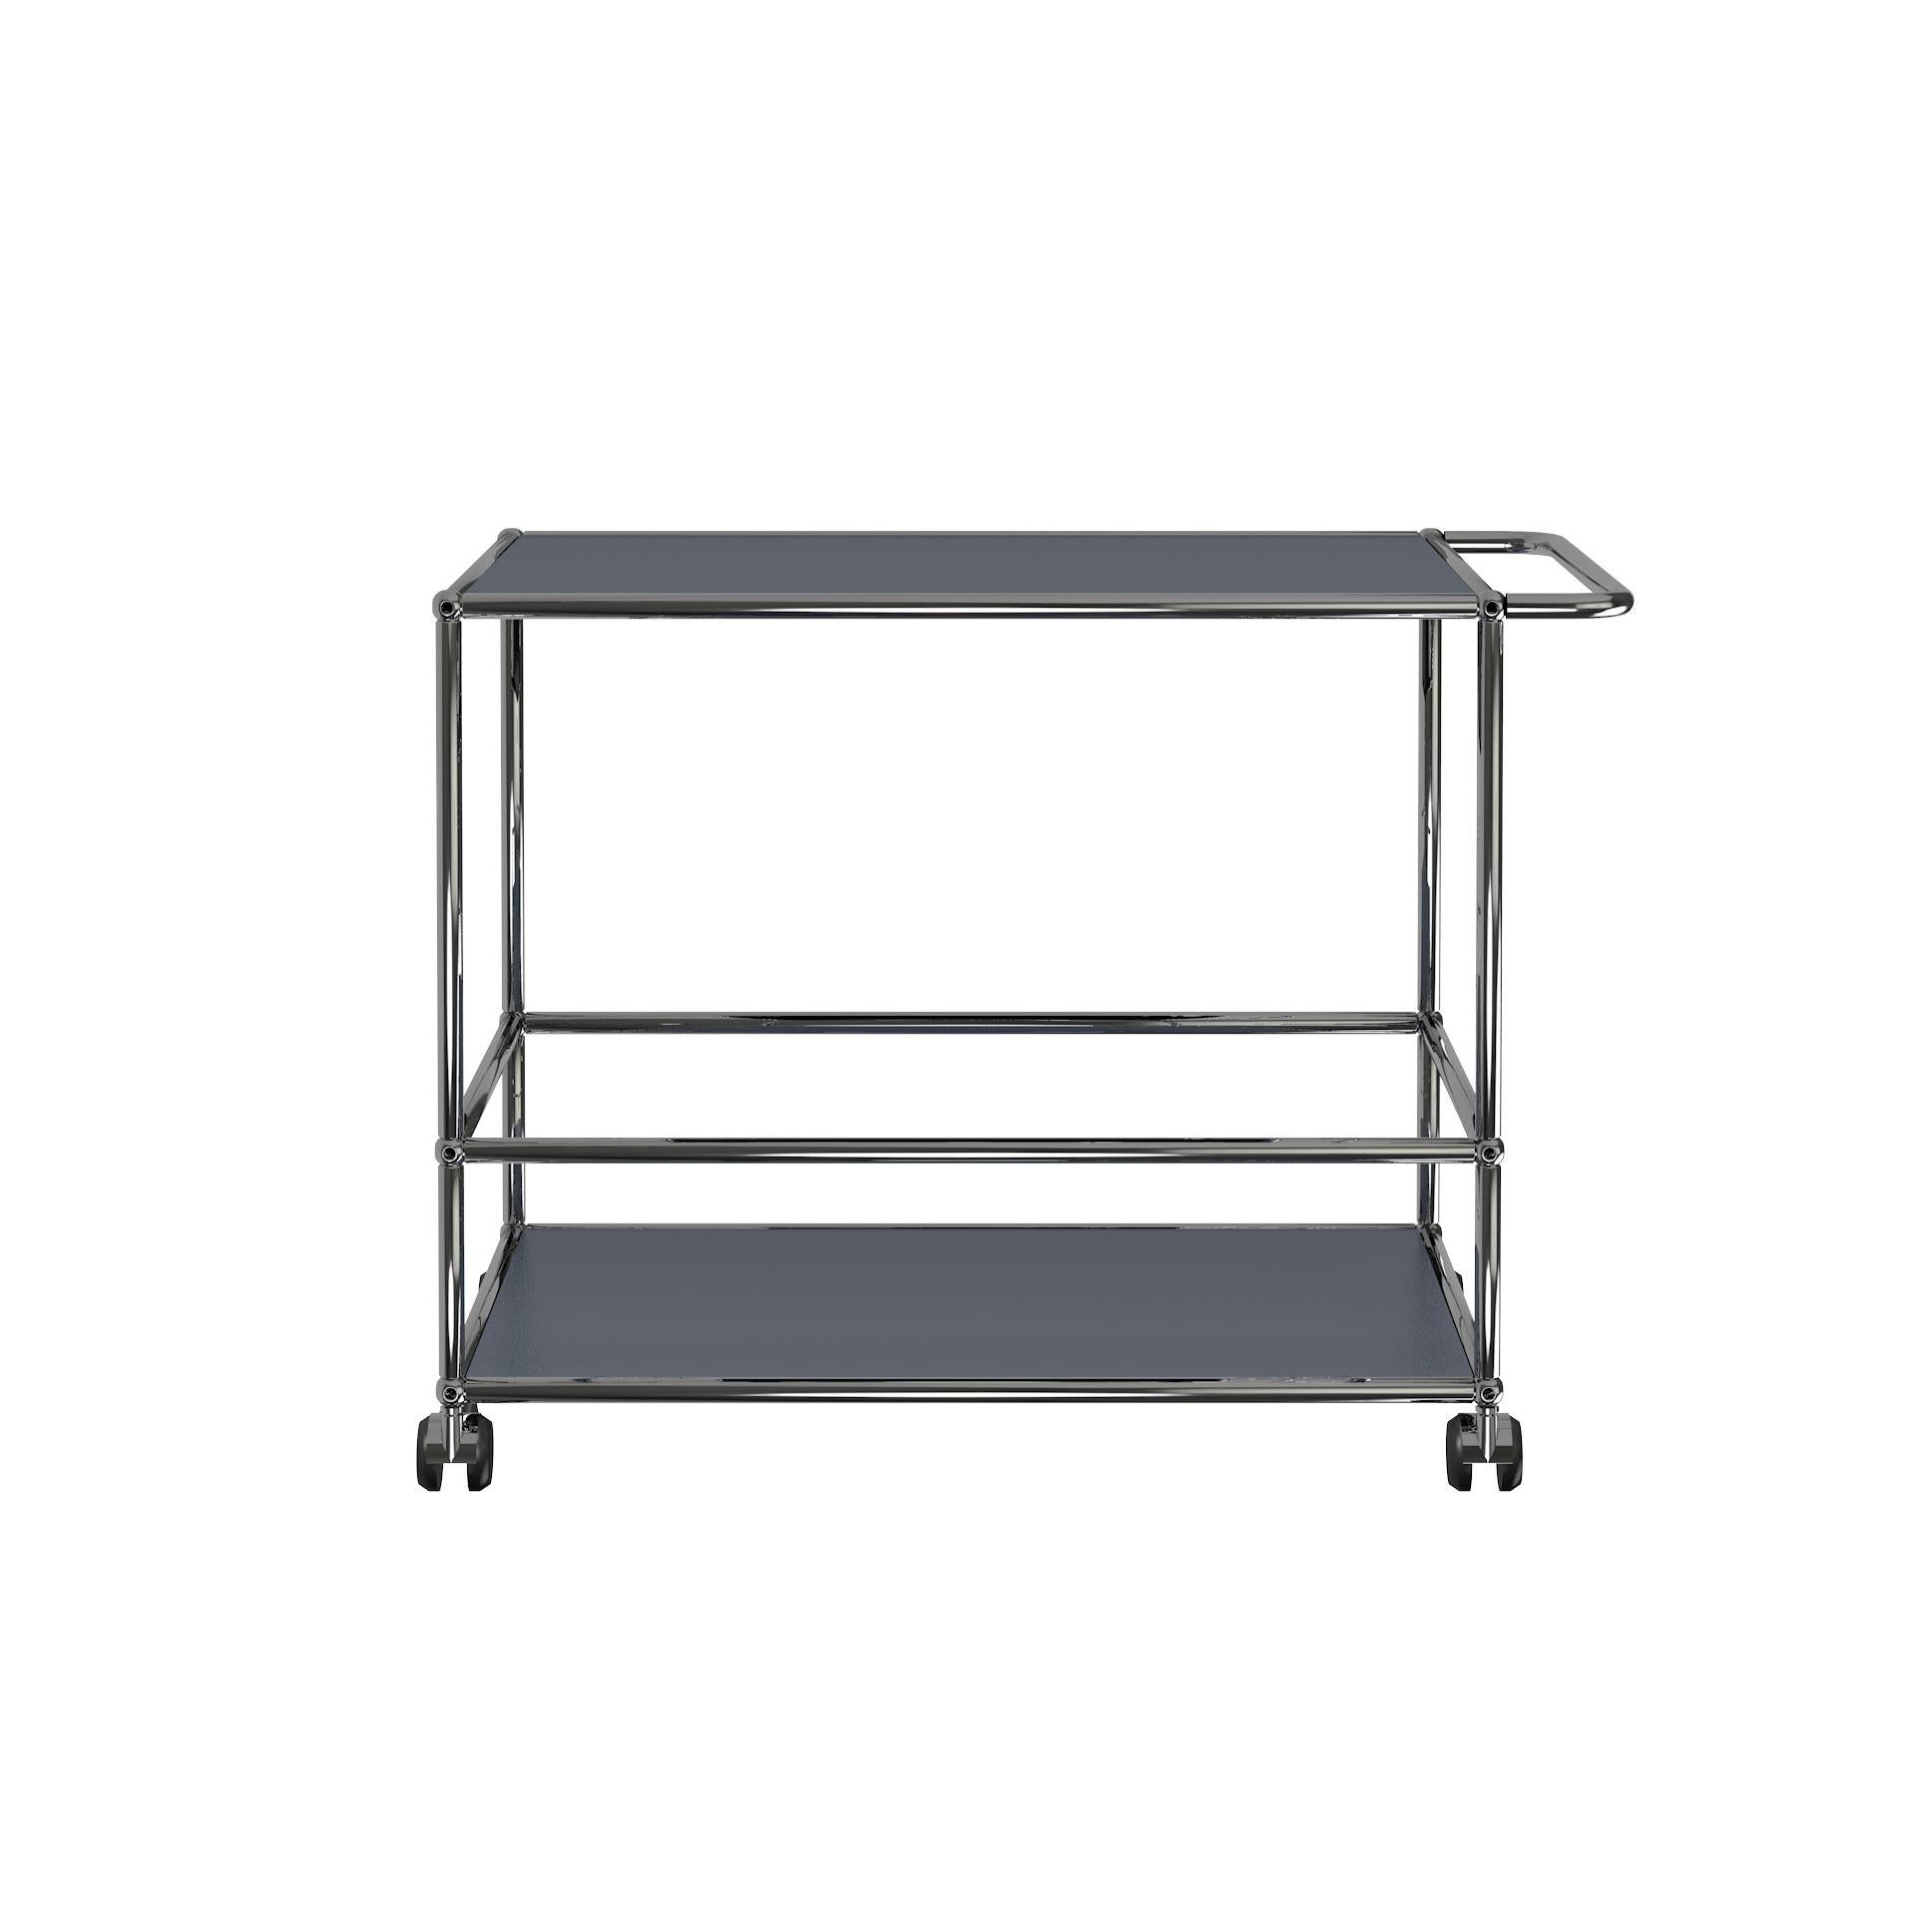 The USM bar cart is available in 5 different color options and measures 31